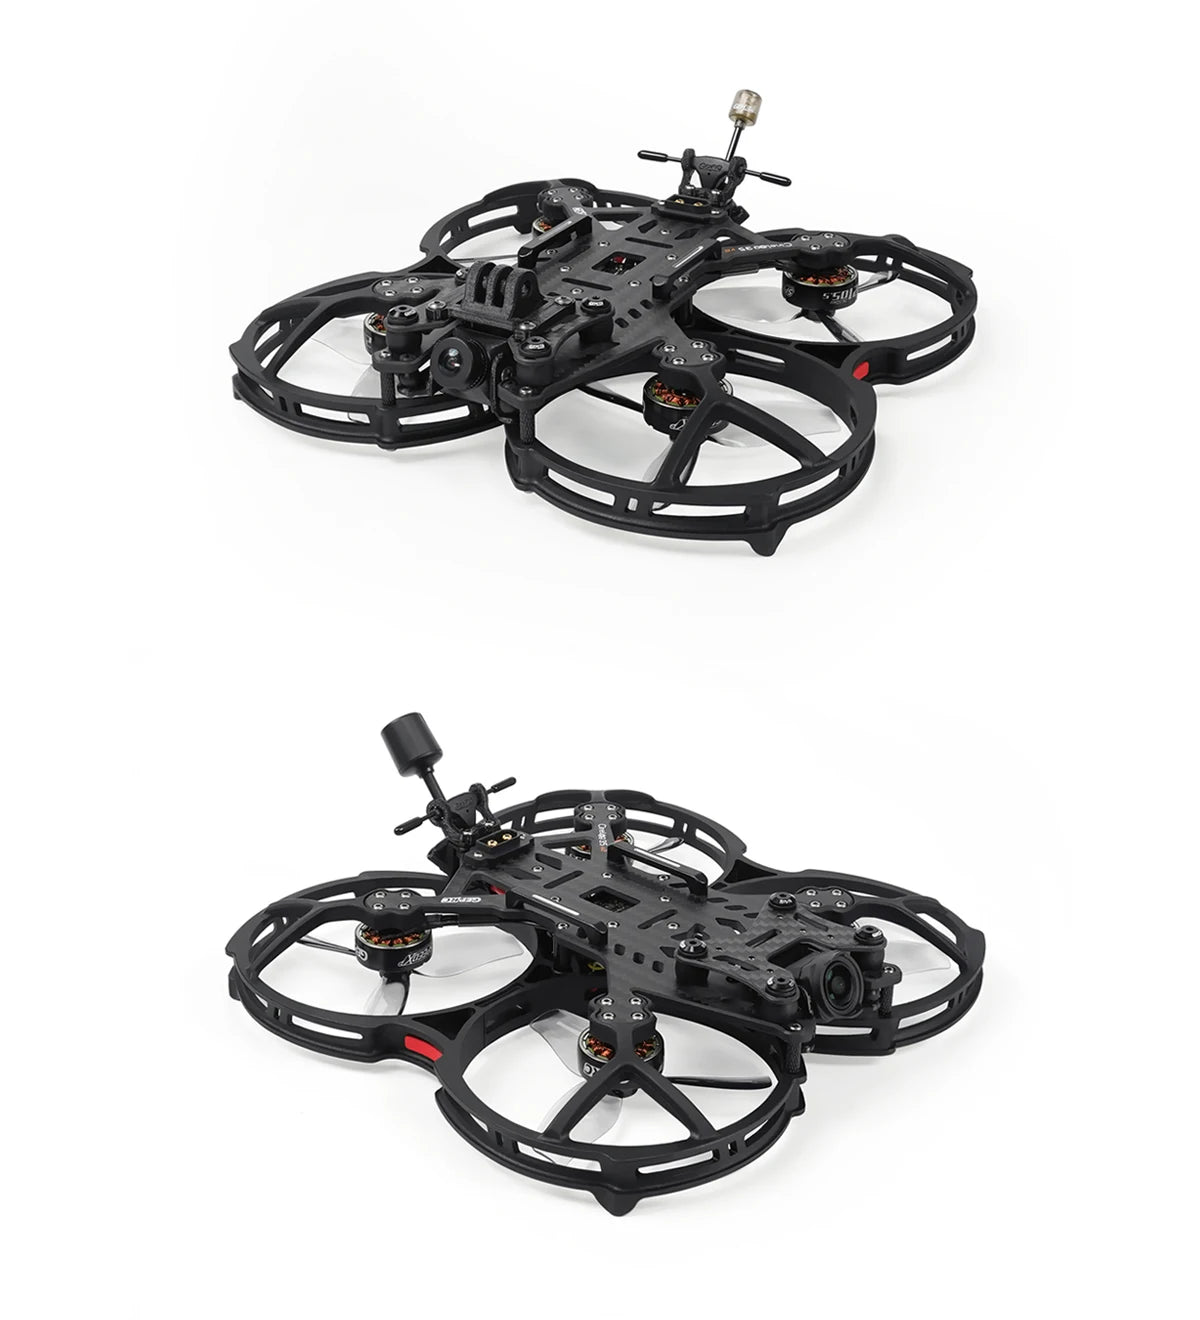 GEPRC CineLog35 V2 HD, FPV with flexible and delicate flight feeling . 3.5-inch HD cinematic 